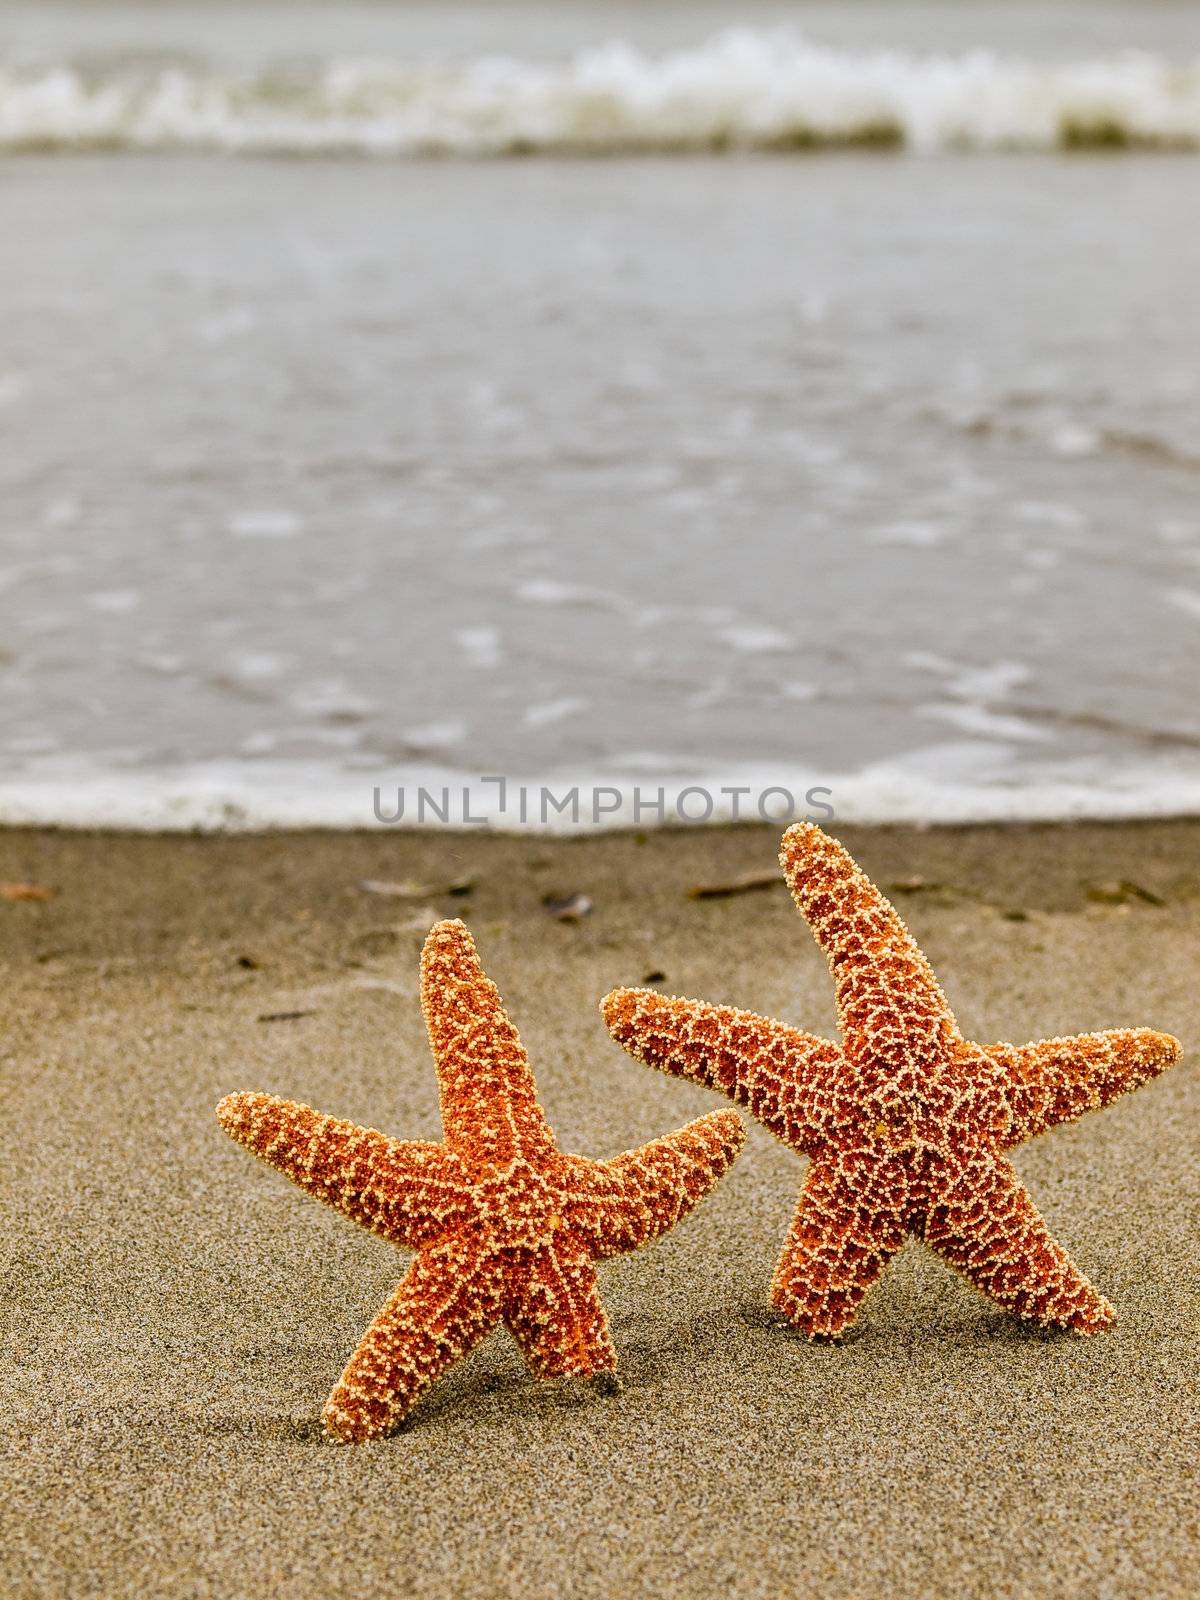 Two Starfish on the Shoreline with Waves in the Background